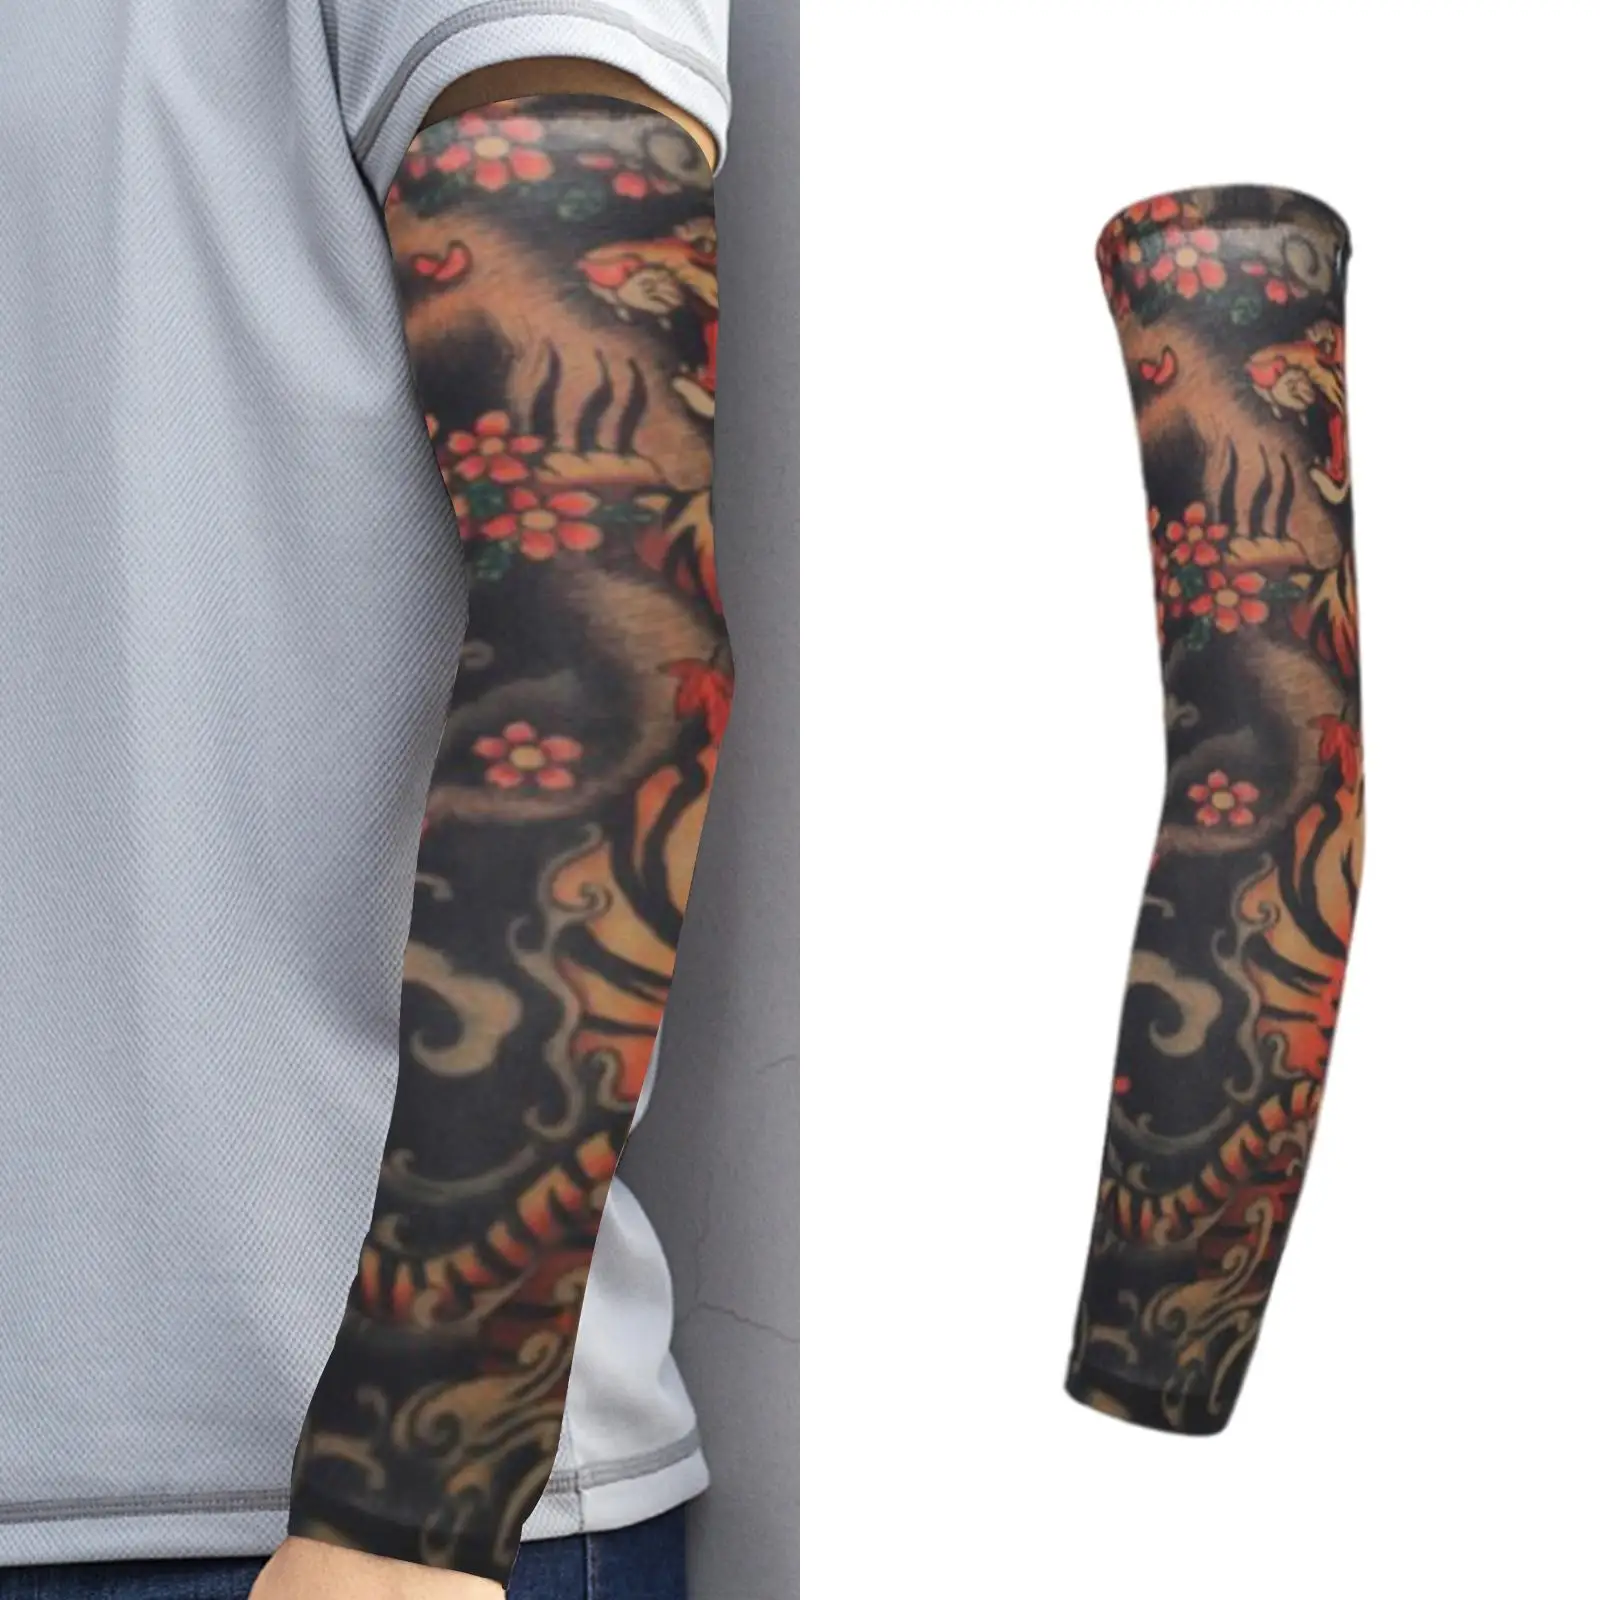 1Pcs Tattoo Arm Sleeves Arm Cover Sun Protection for Golf Outdoor Activities